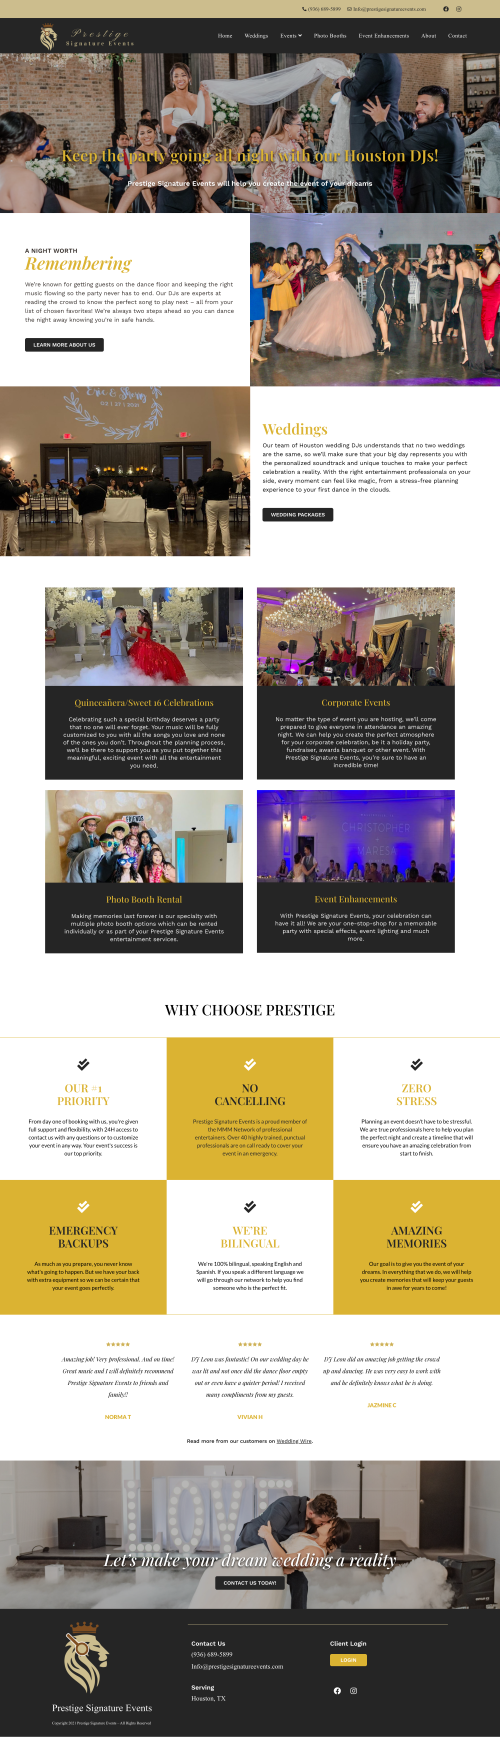 effective use of photos and graphics for wedding websites